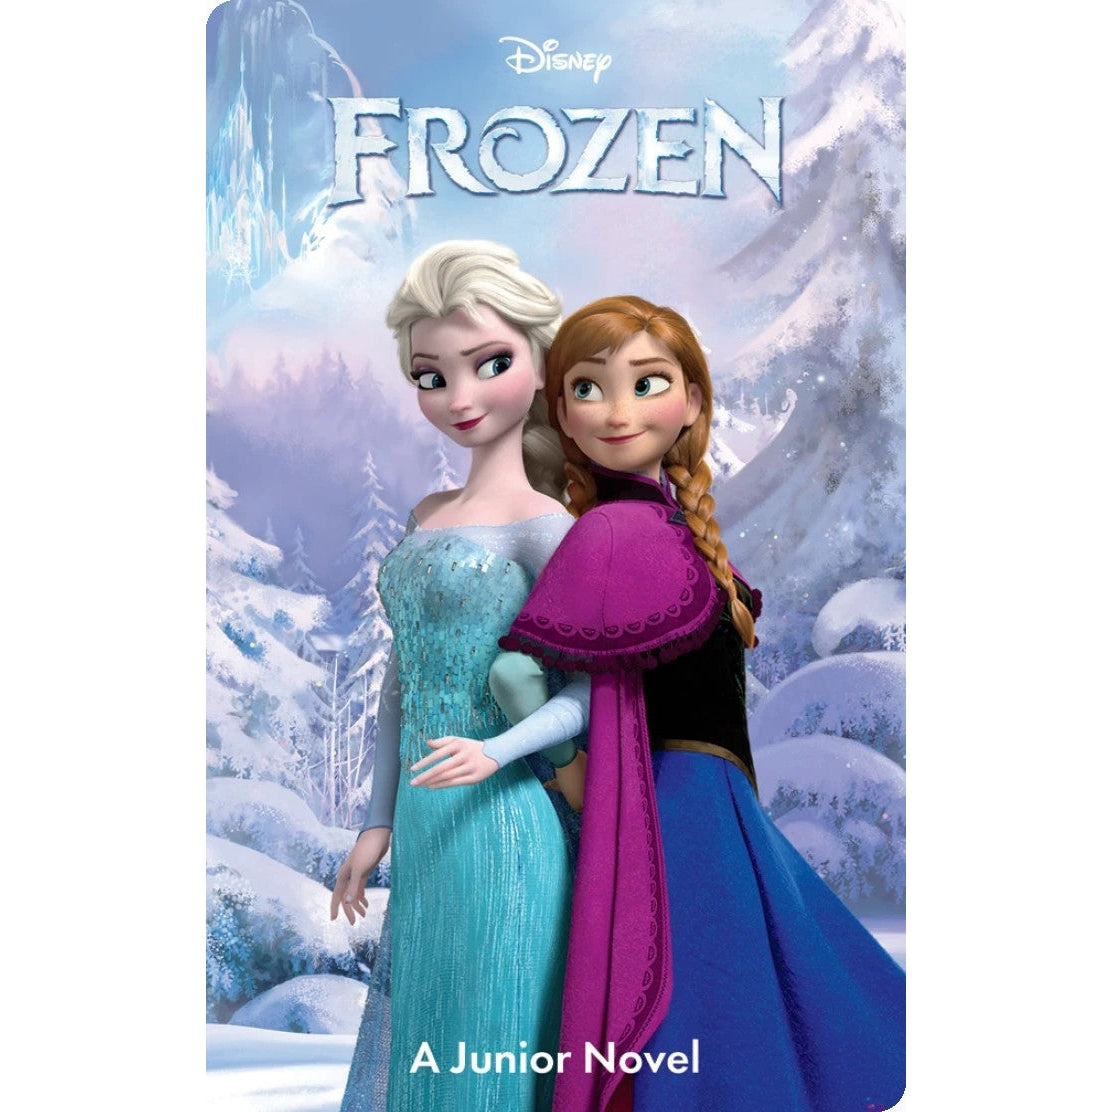 Yoto Card - Disney Frozen - Child Friendly Audio Story Card for the Yoto Player